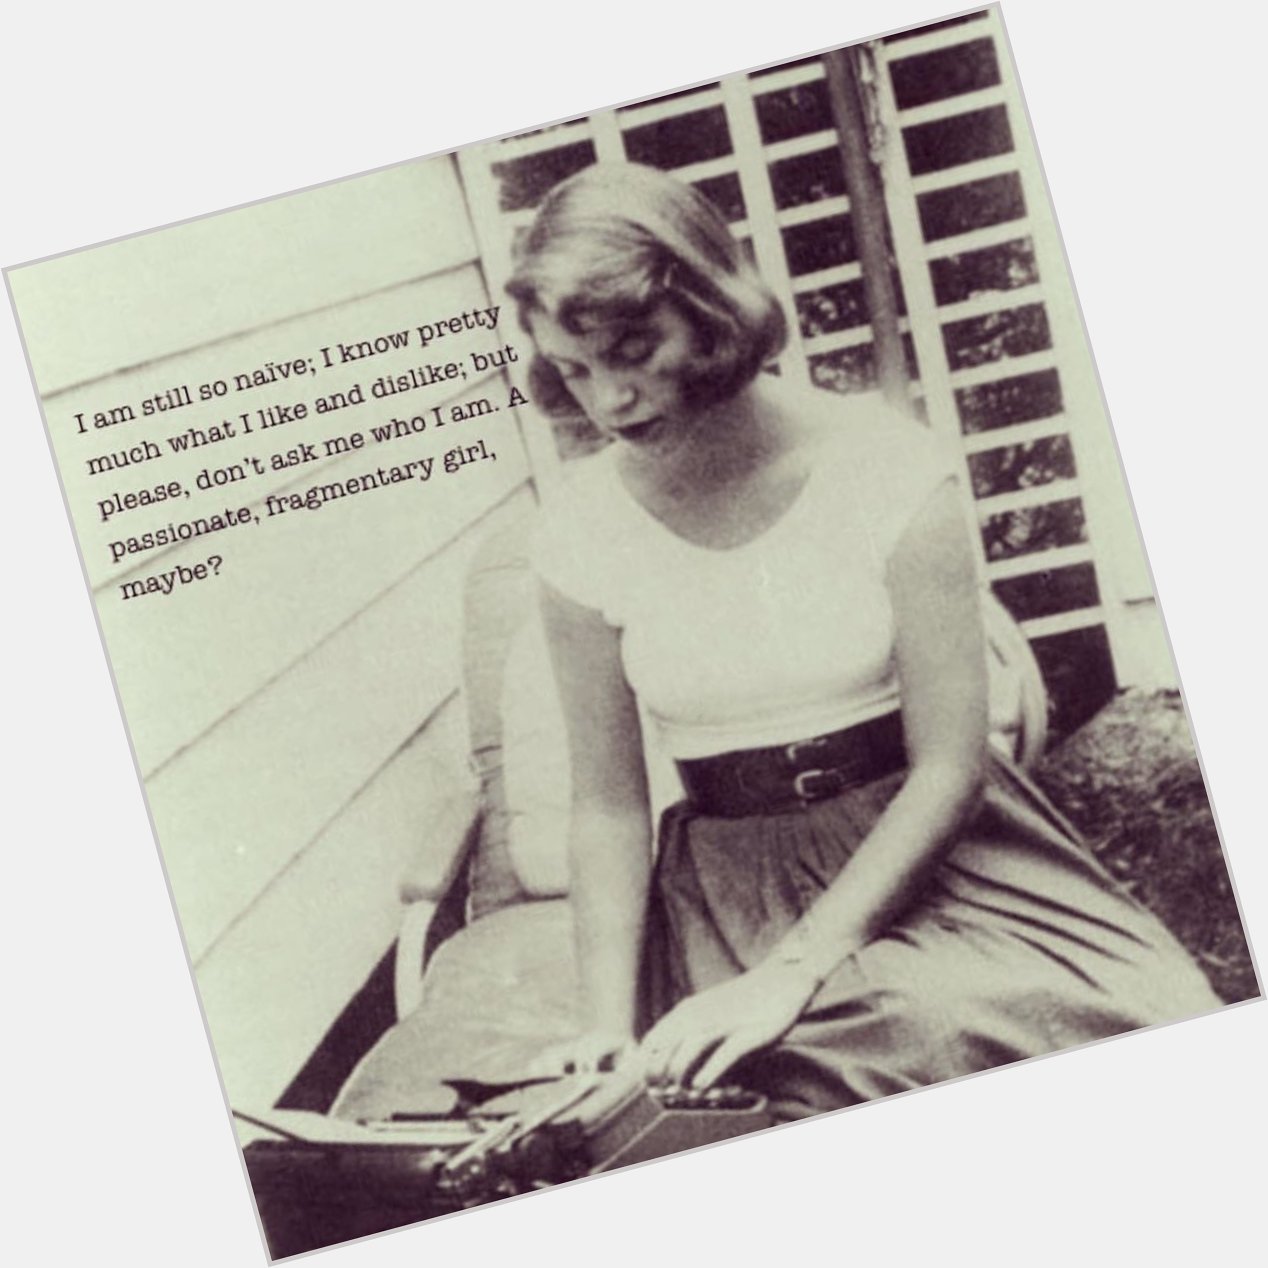 Happy birthday to my favorite writer / poet, I aspire to be as talented as Sylvia Plath 